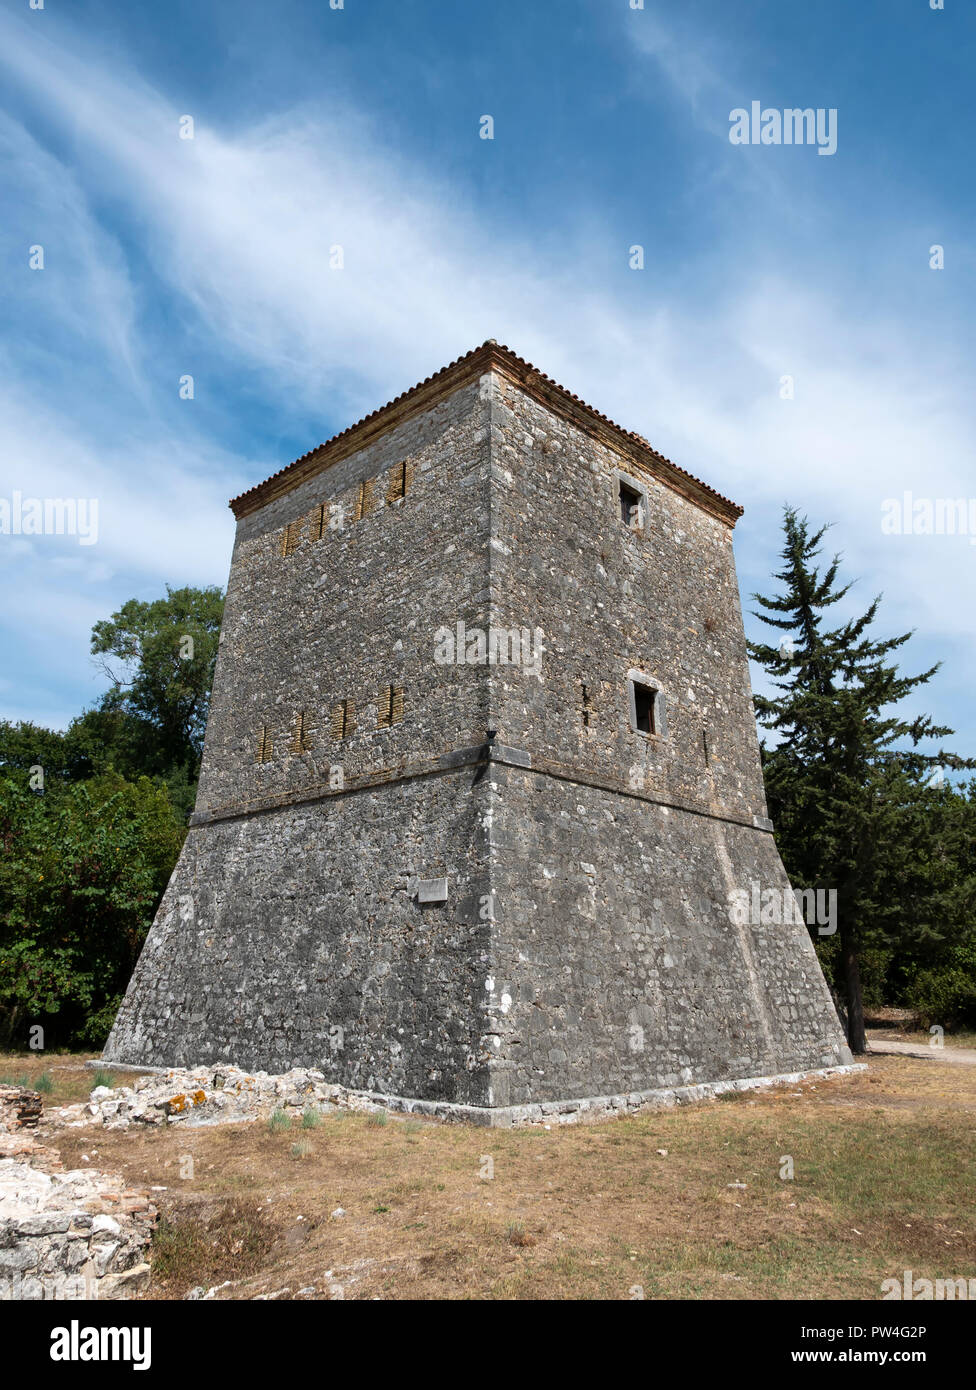 The Venetian Tower, The Butrint National Park, Vlore County, The Republic of Albania. Stock Photo